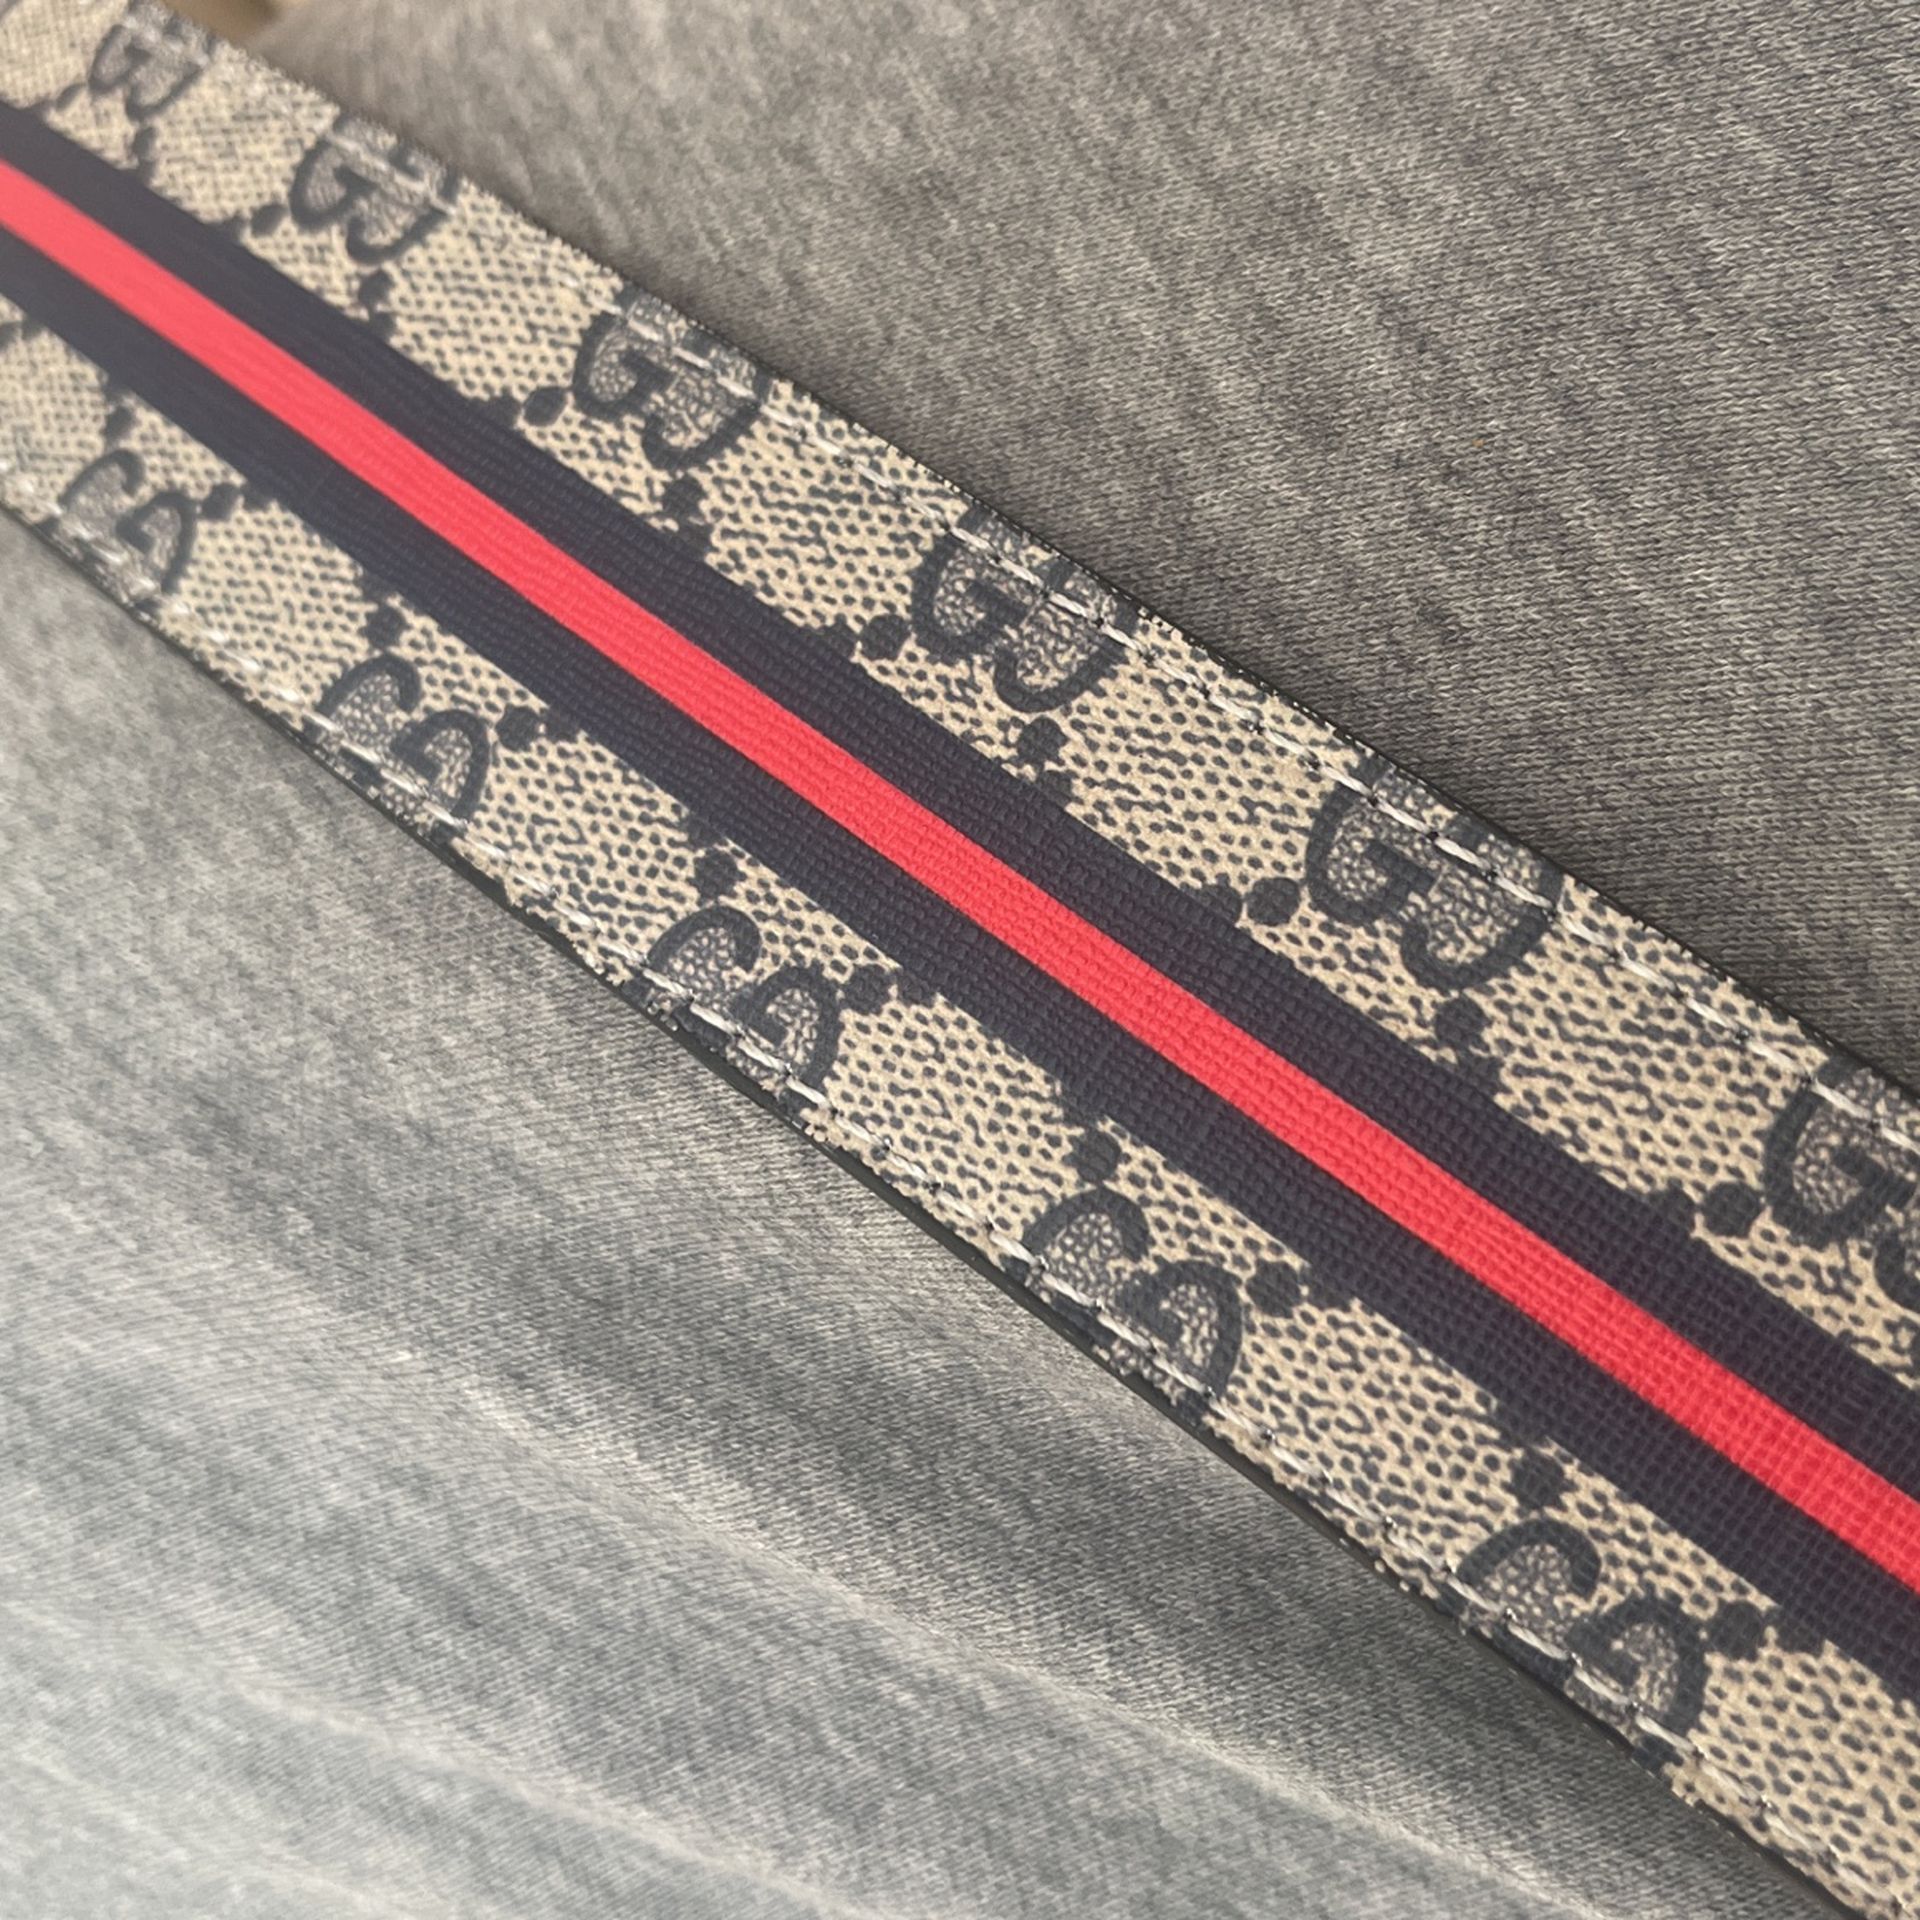 Authentic Gucci Belt fits size 48/120 L-XL fits pants size 34-38 for Sale  in Snohomish, WA - OfferUp